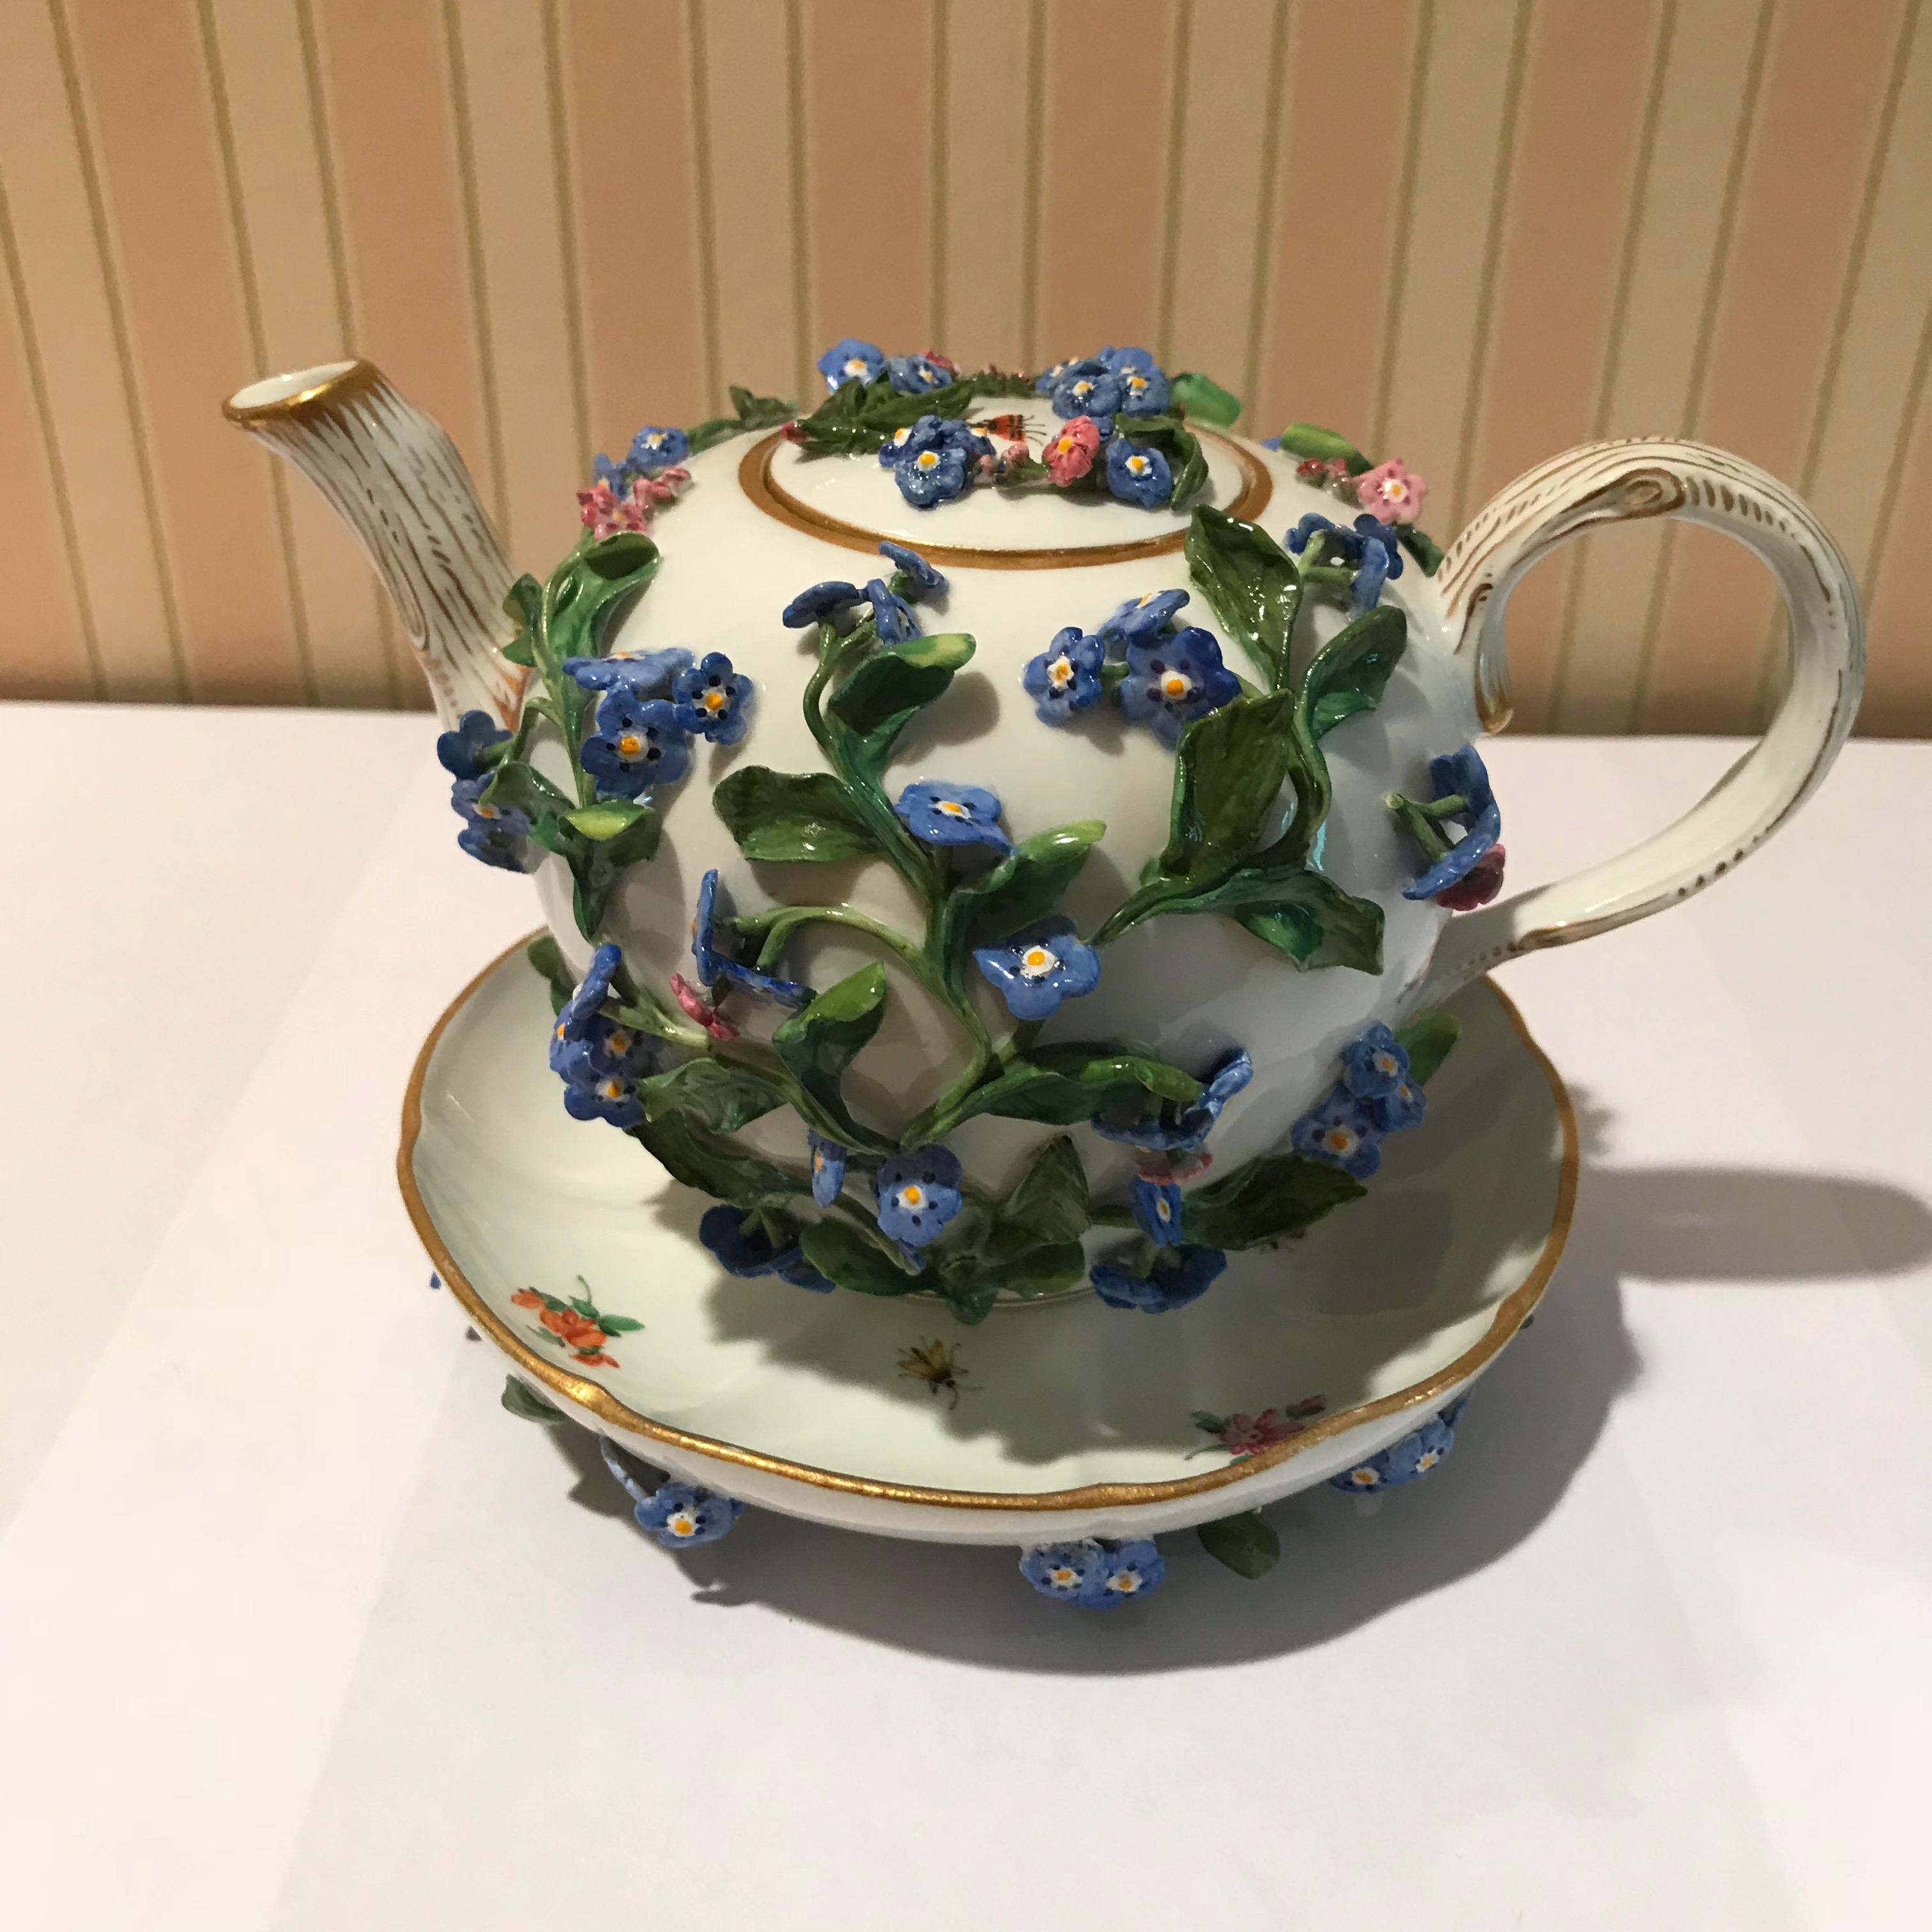 A lot of Meissen porcelain tea set encrusted with flowers. Lot comes with two ewers, miniature cup and saucer, lidded teapot, lidded cup, and cup and saucer.